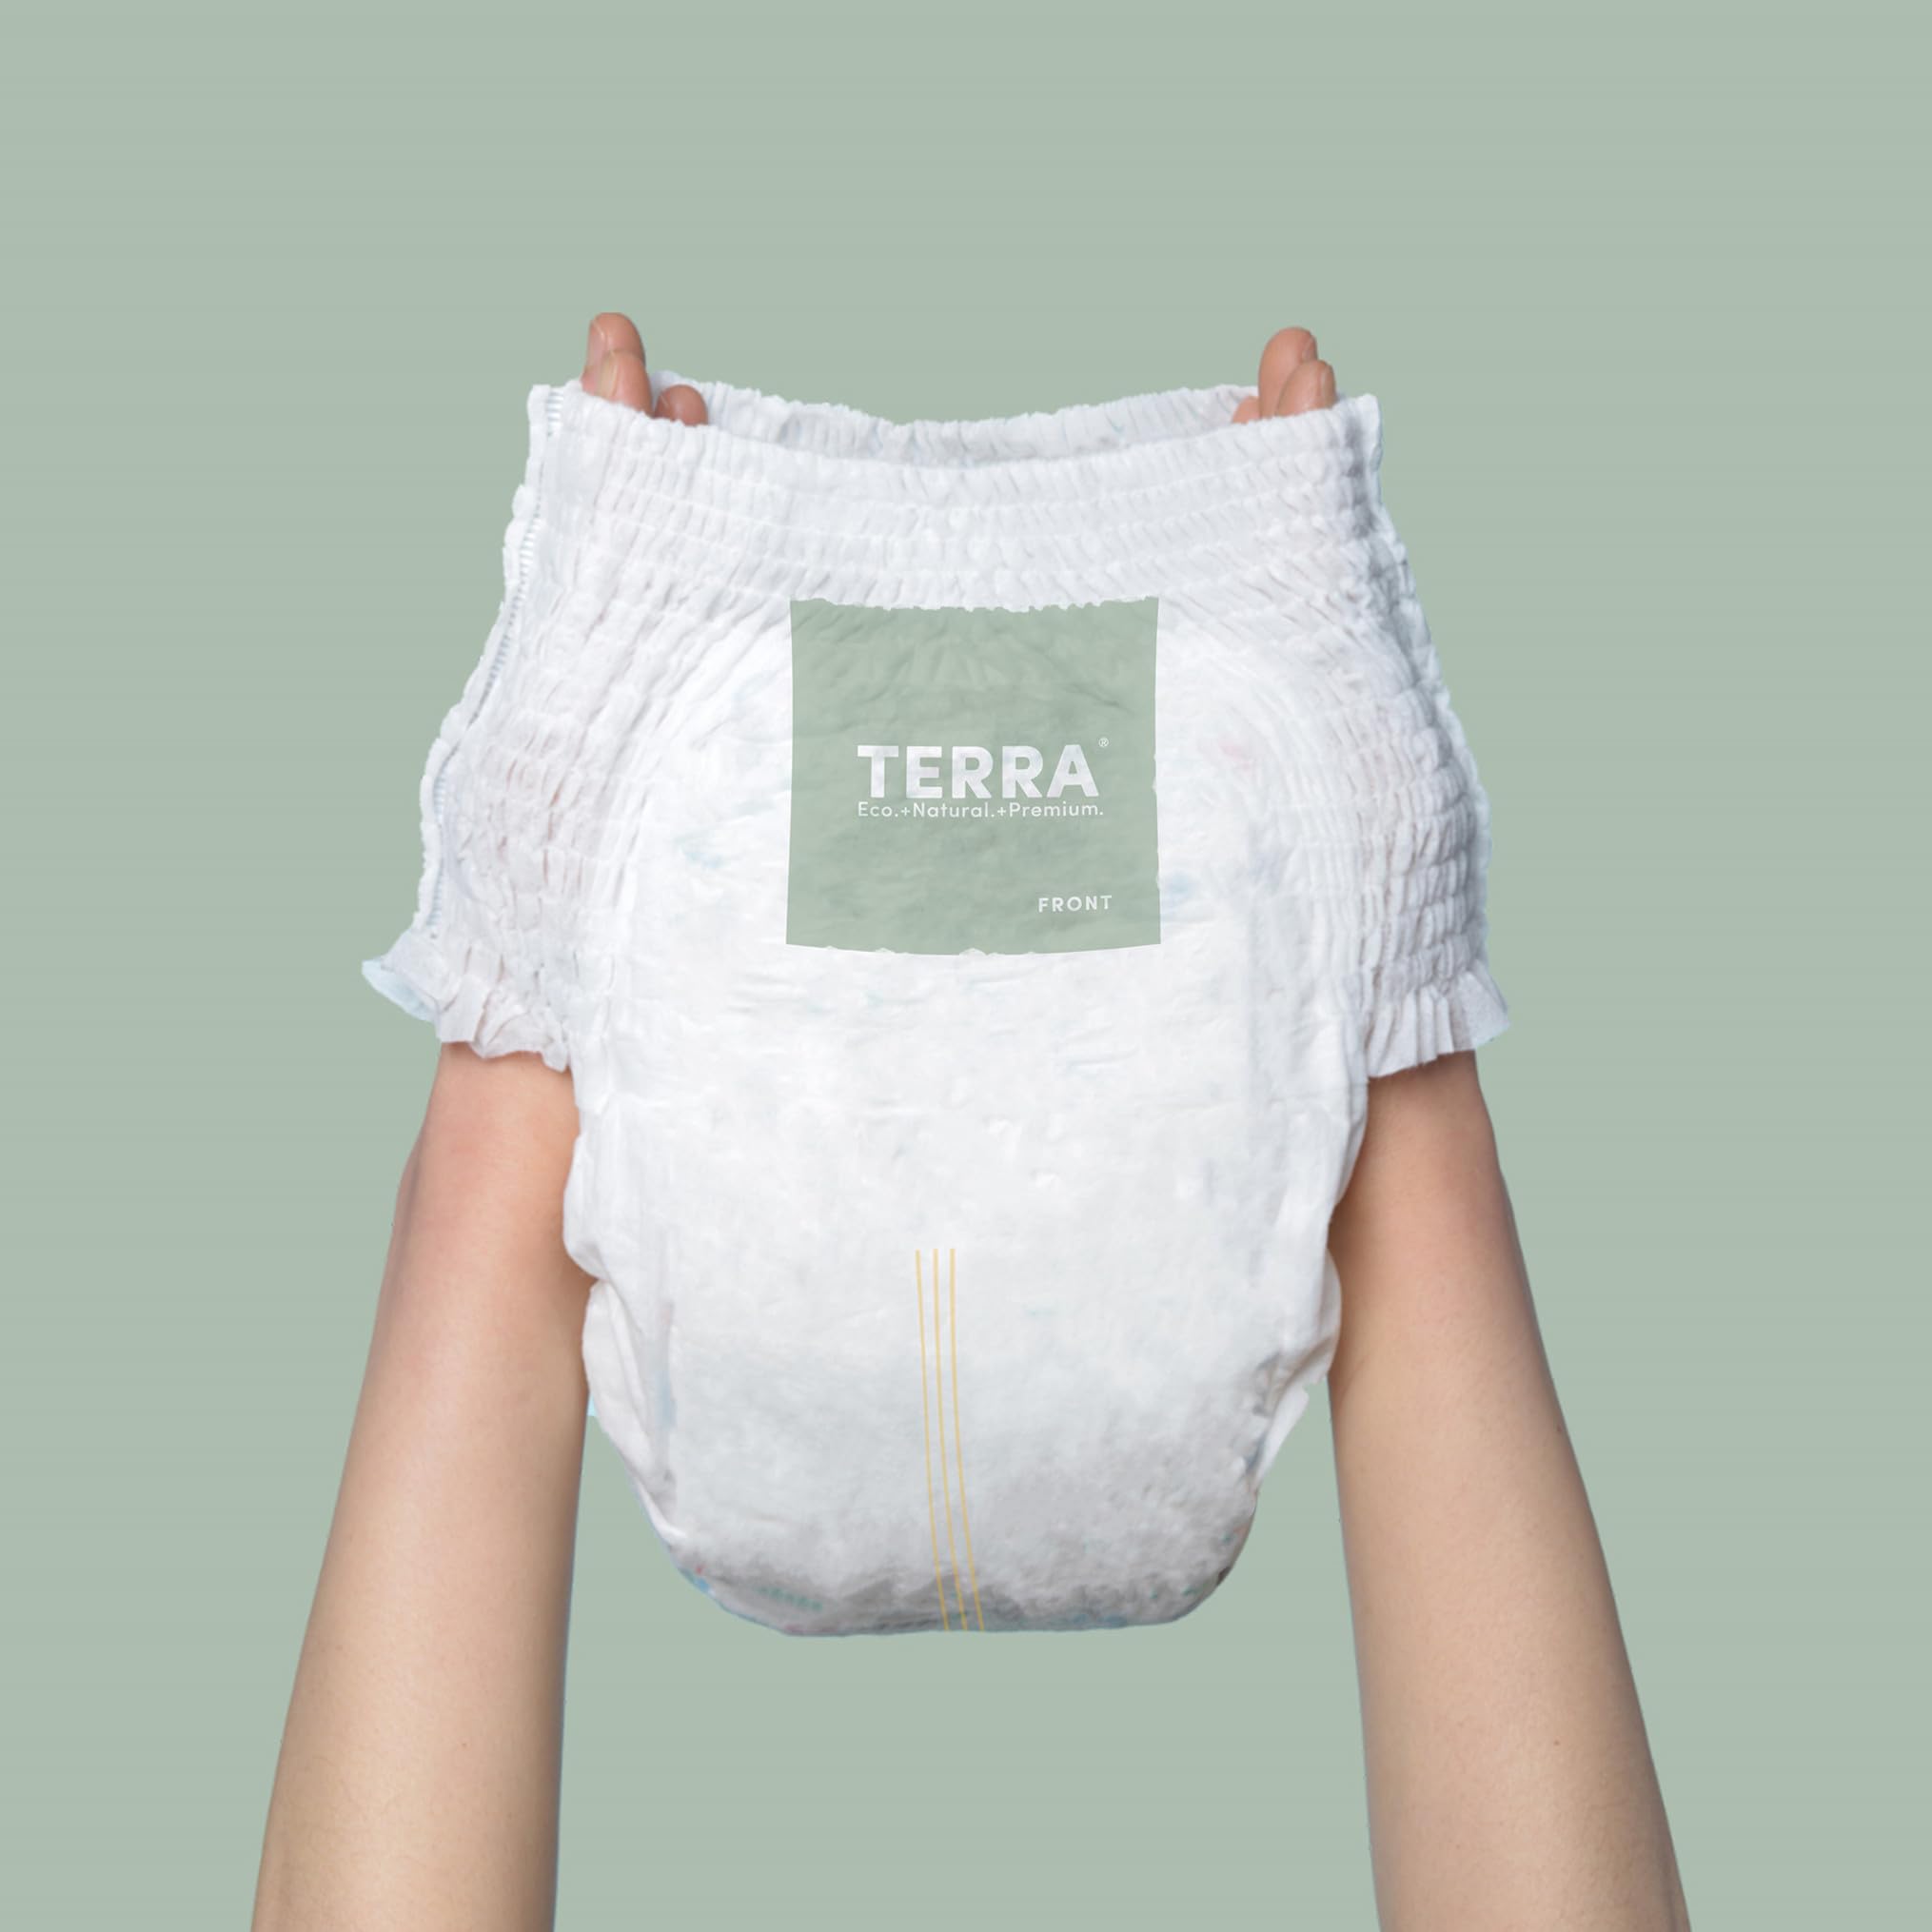 Terra Size 4 Training Pants– 85% Plant Based Pull-Up Style Diapers, Ultra-Soft & Chemical-Free for Sensitive Skin, Superior Absorbency, Perfect Overnight Diapers, for Toddlers 22-30 Pounds, 16 Count